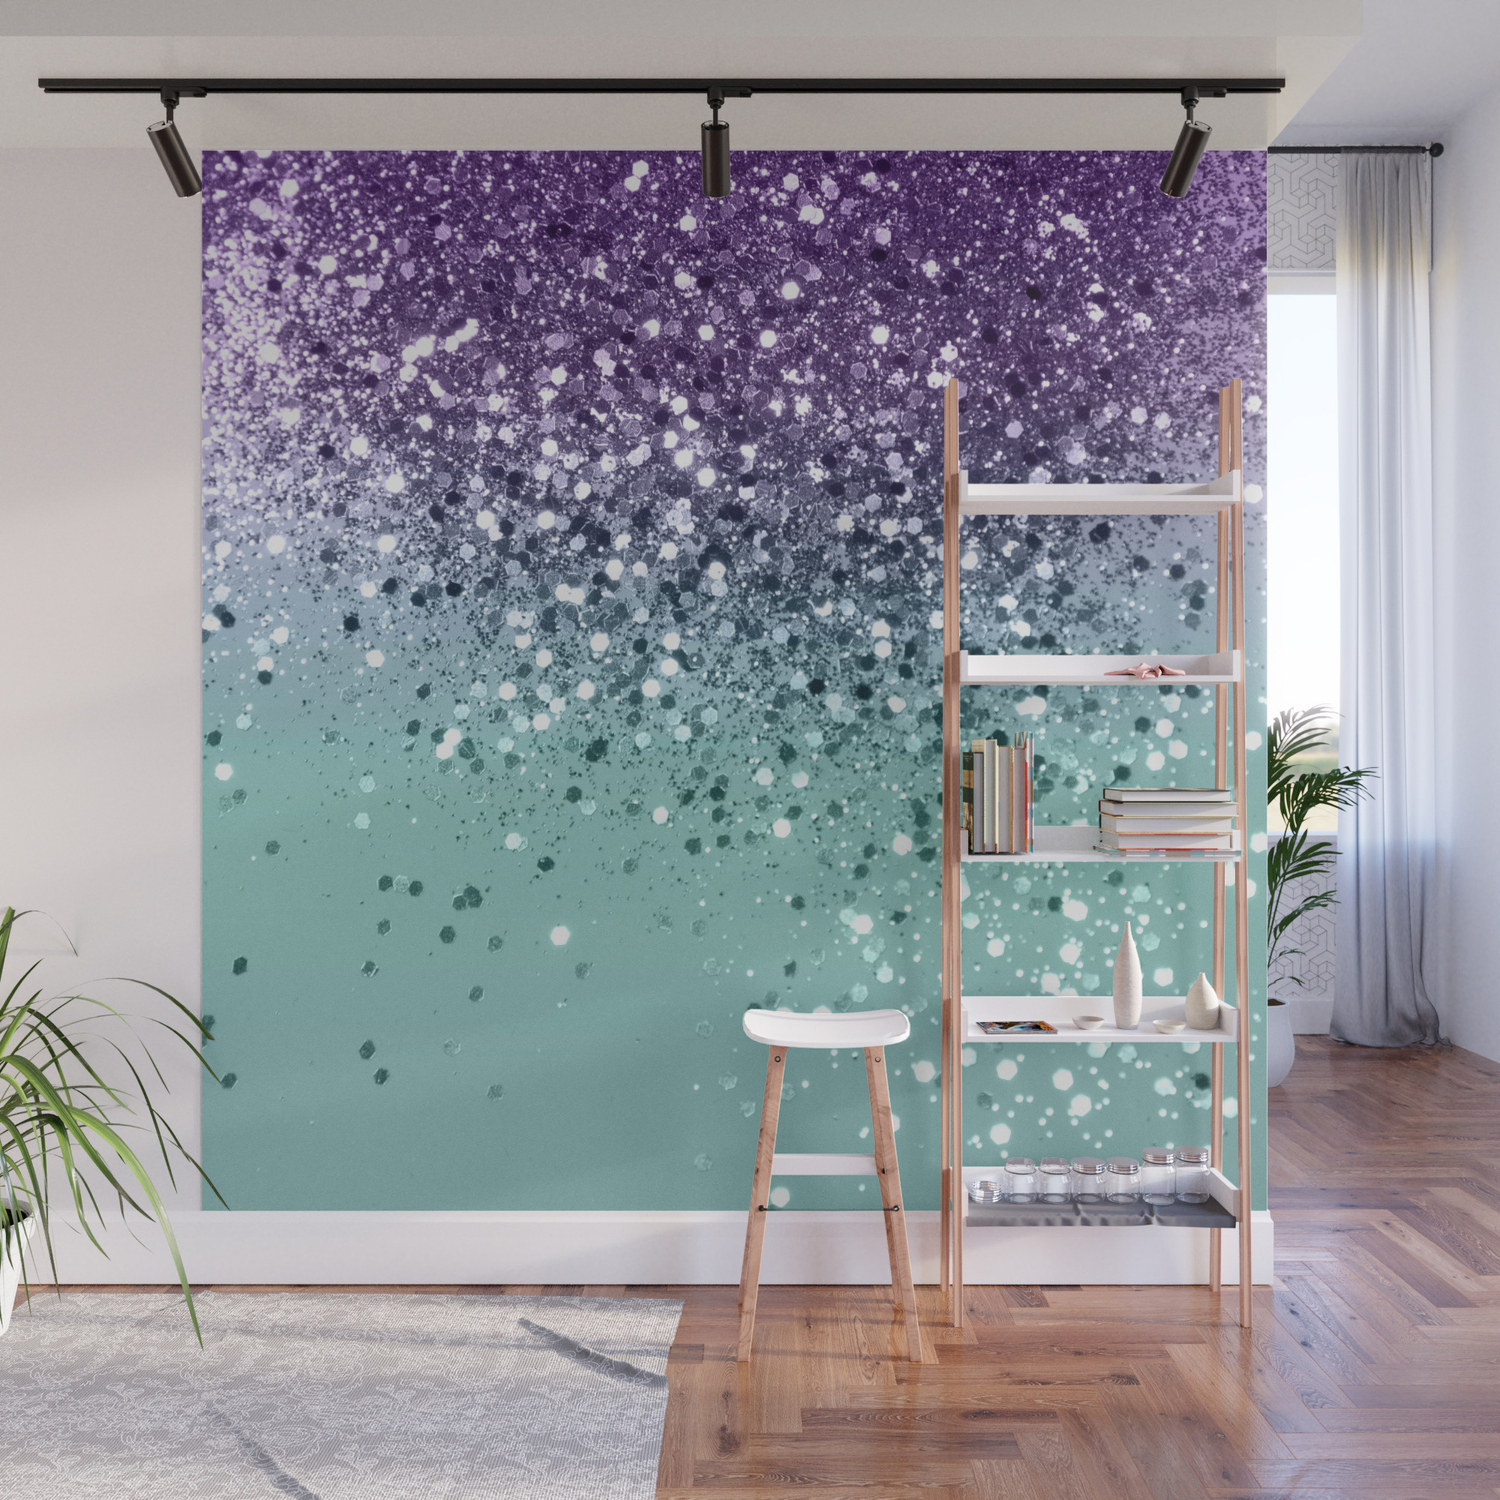 Wall Mural Photo Wallpaper Standard Paper Silver Violet Abstract Art Room Decor